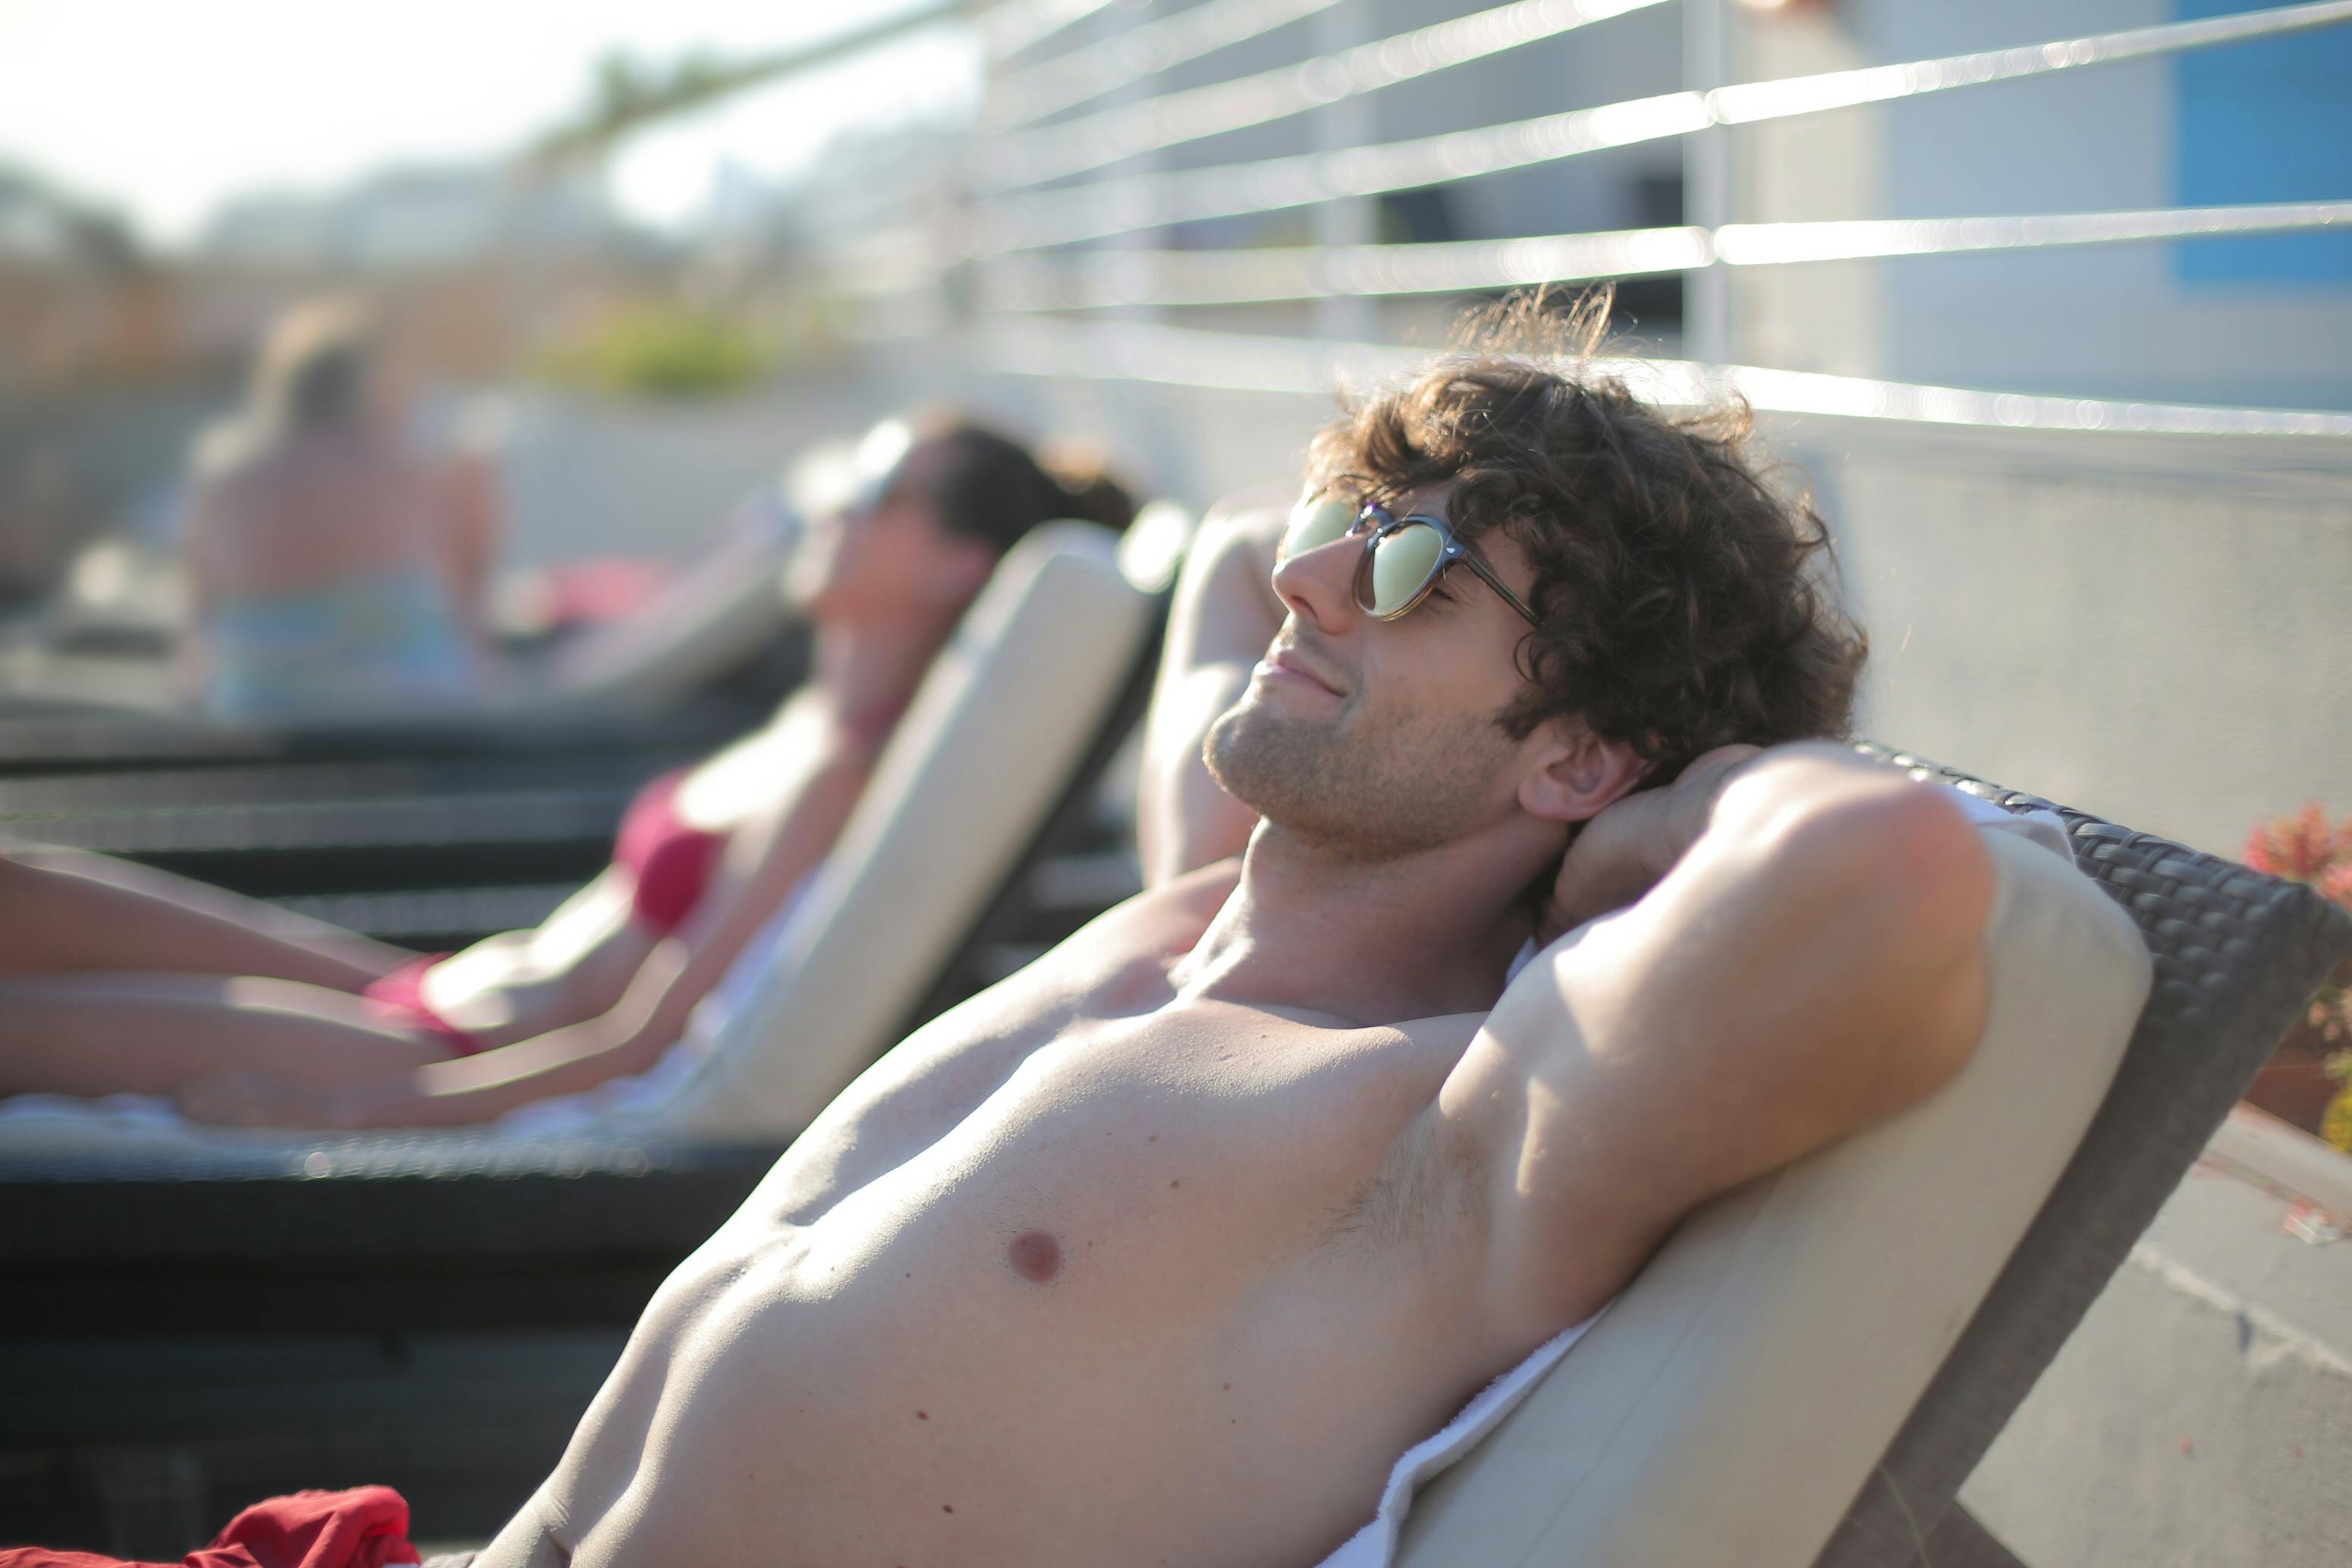 A happy man wearing sunglasses while lying on a sunbed | Source: Pexels